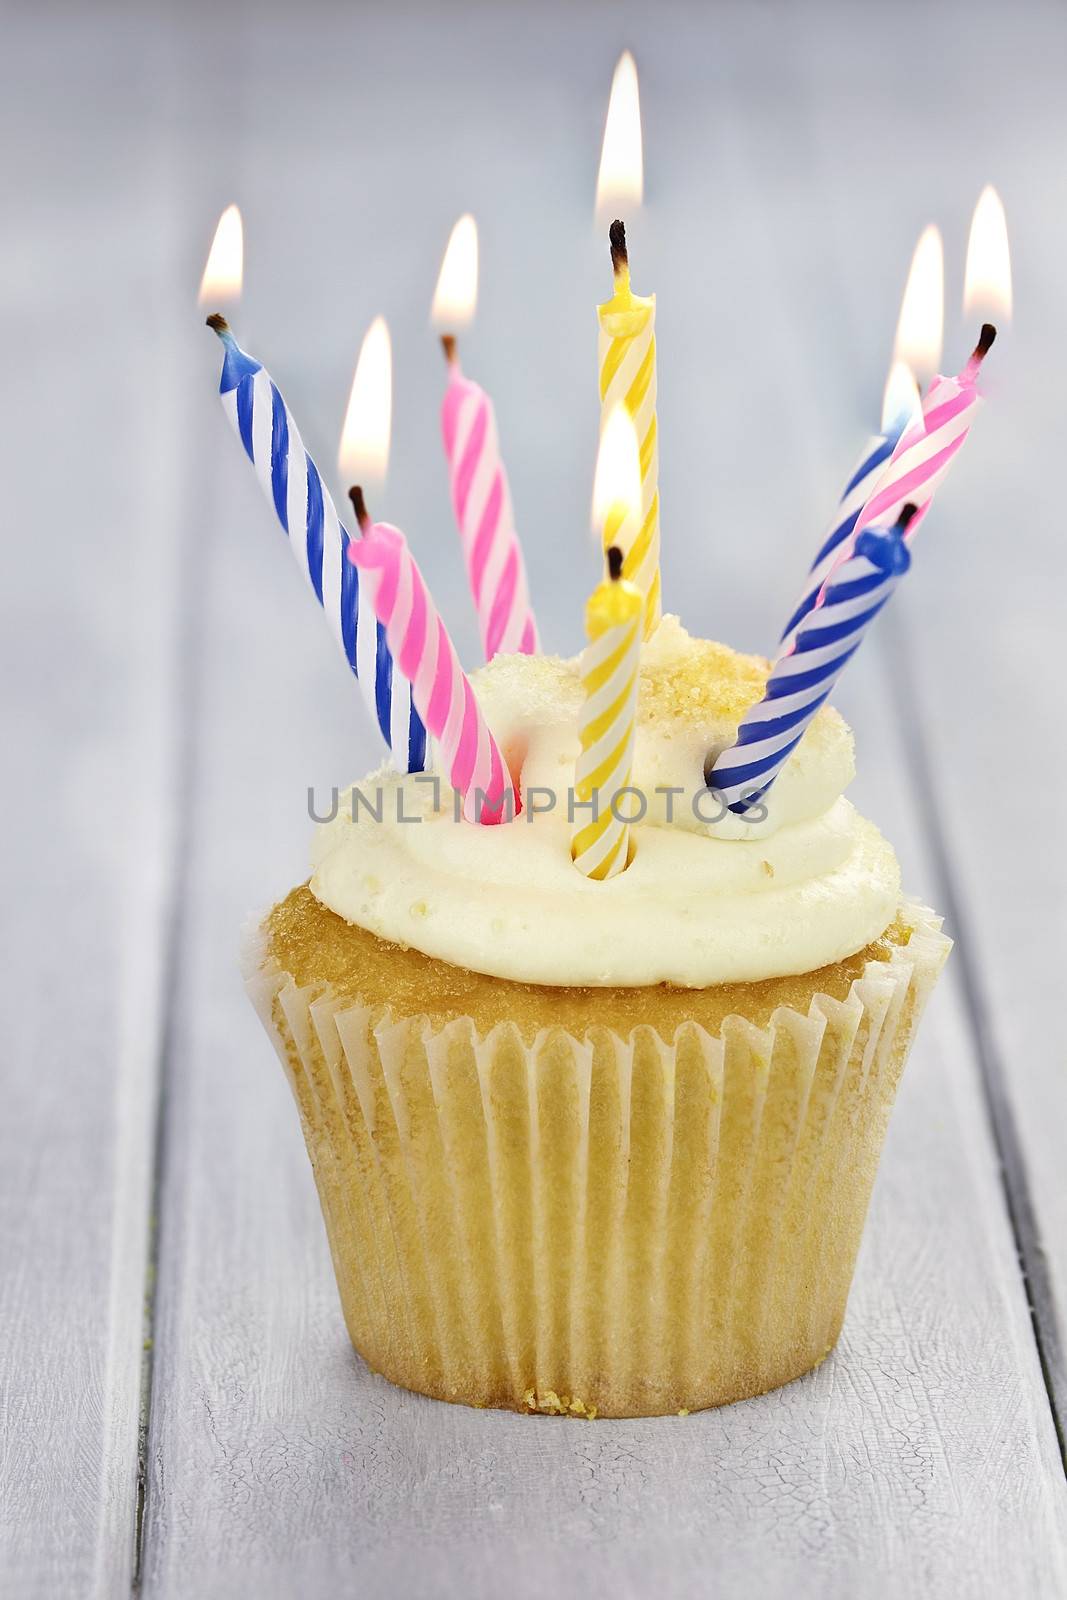 Cupcake with eight burning candles and copy space. Shallow depth of field.